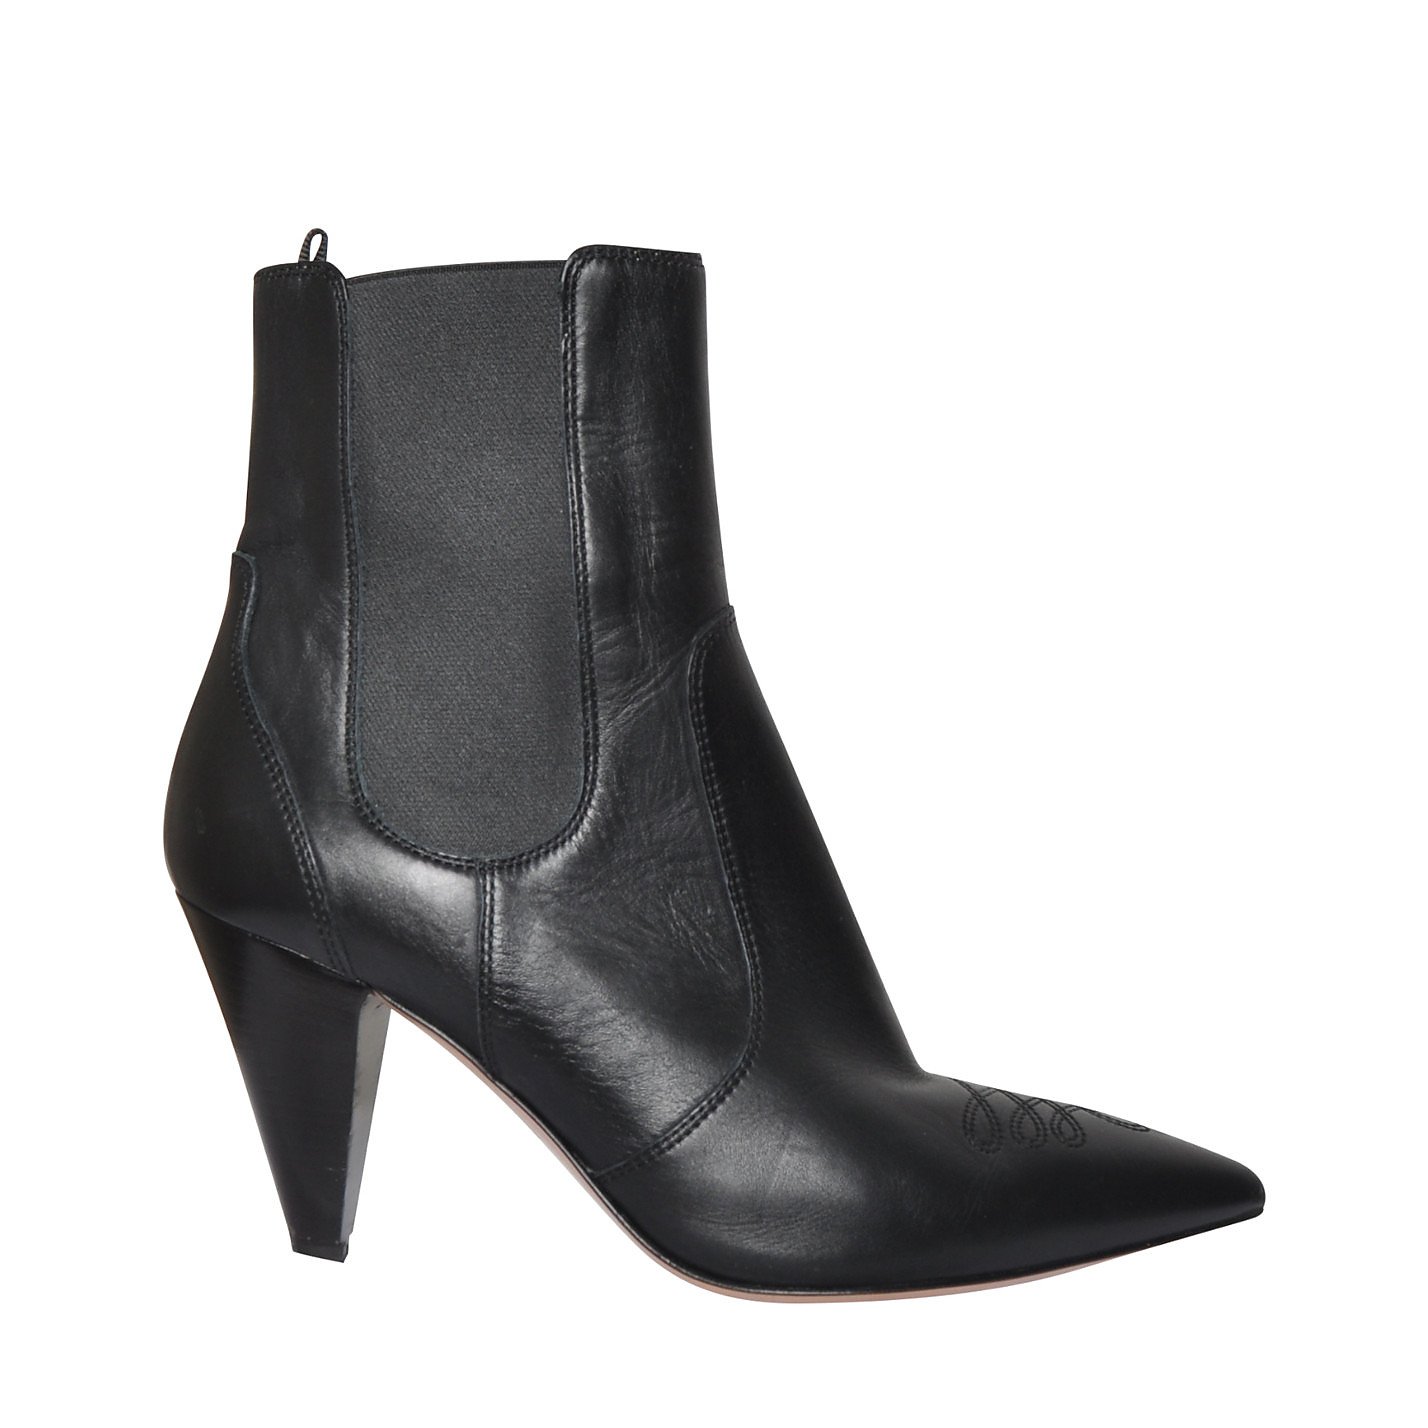 GIANVITO ROSSI Heeled Pointed Boots